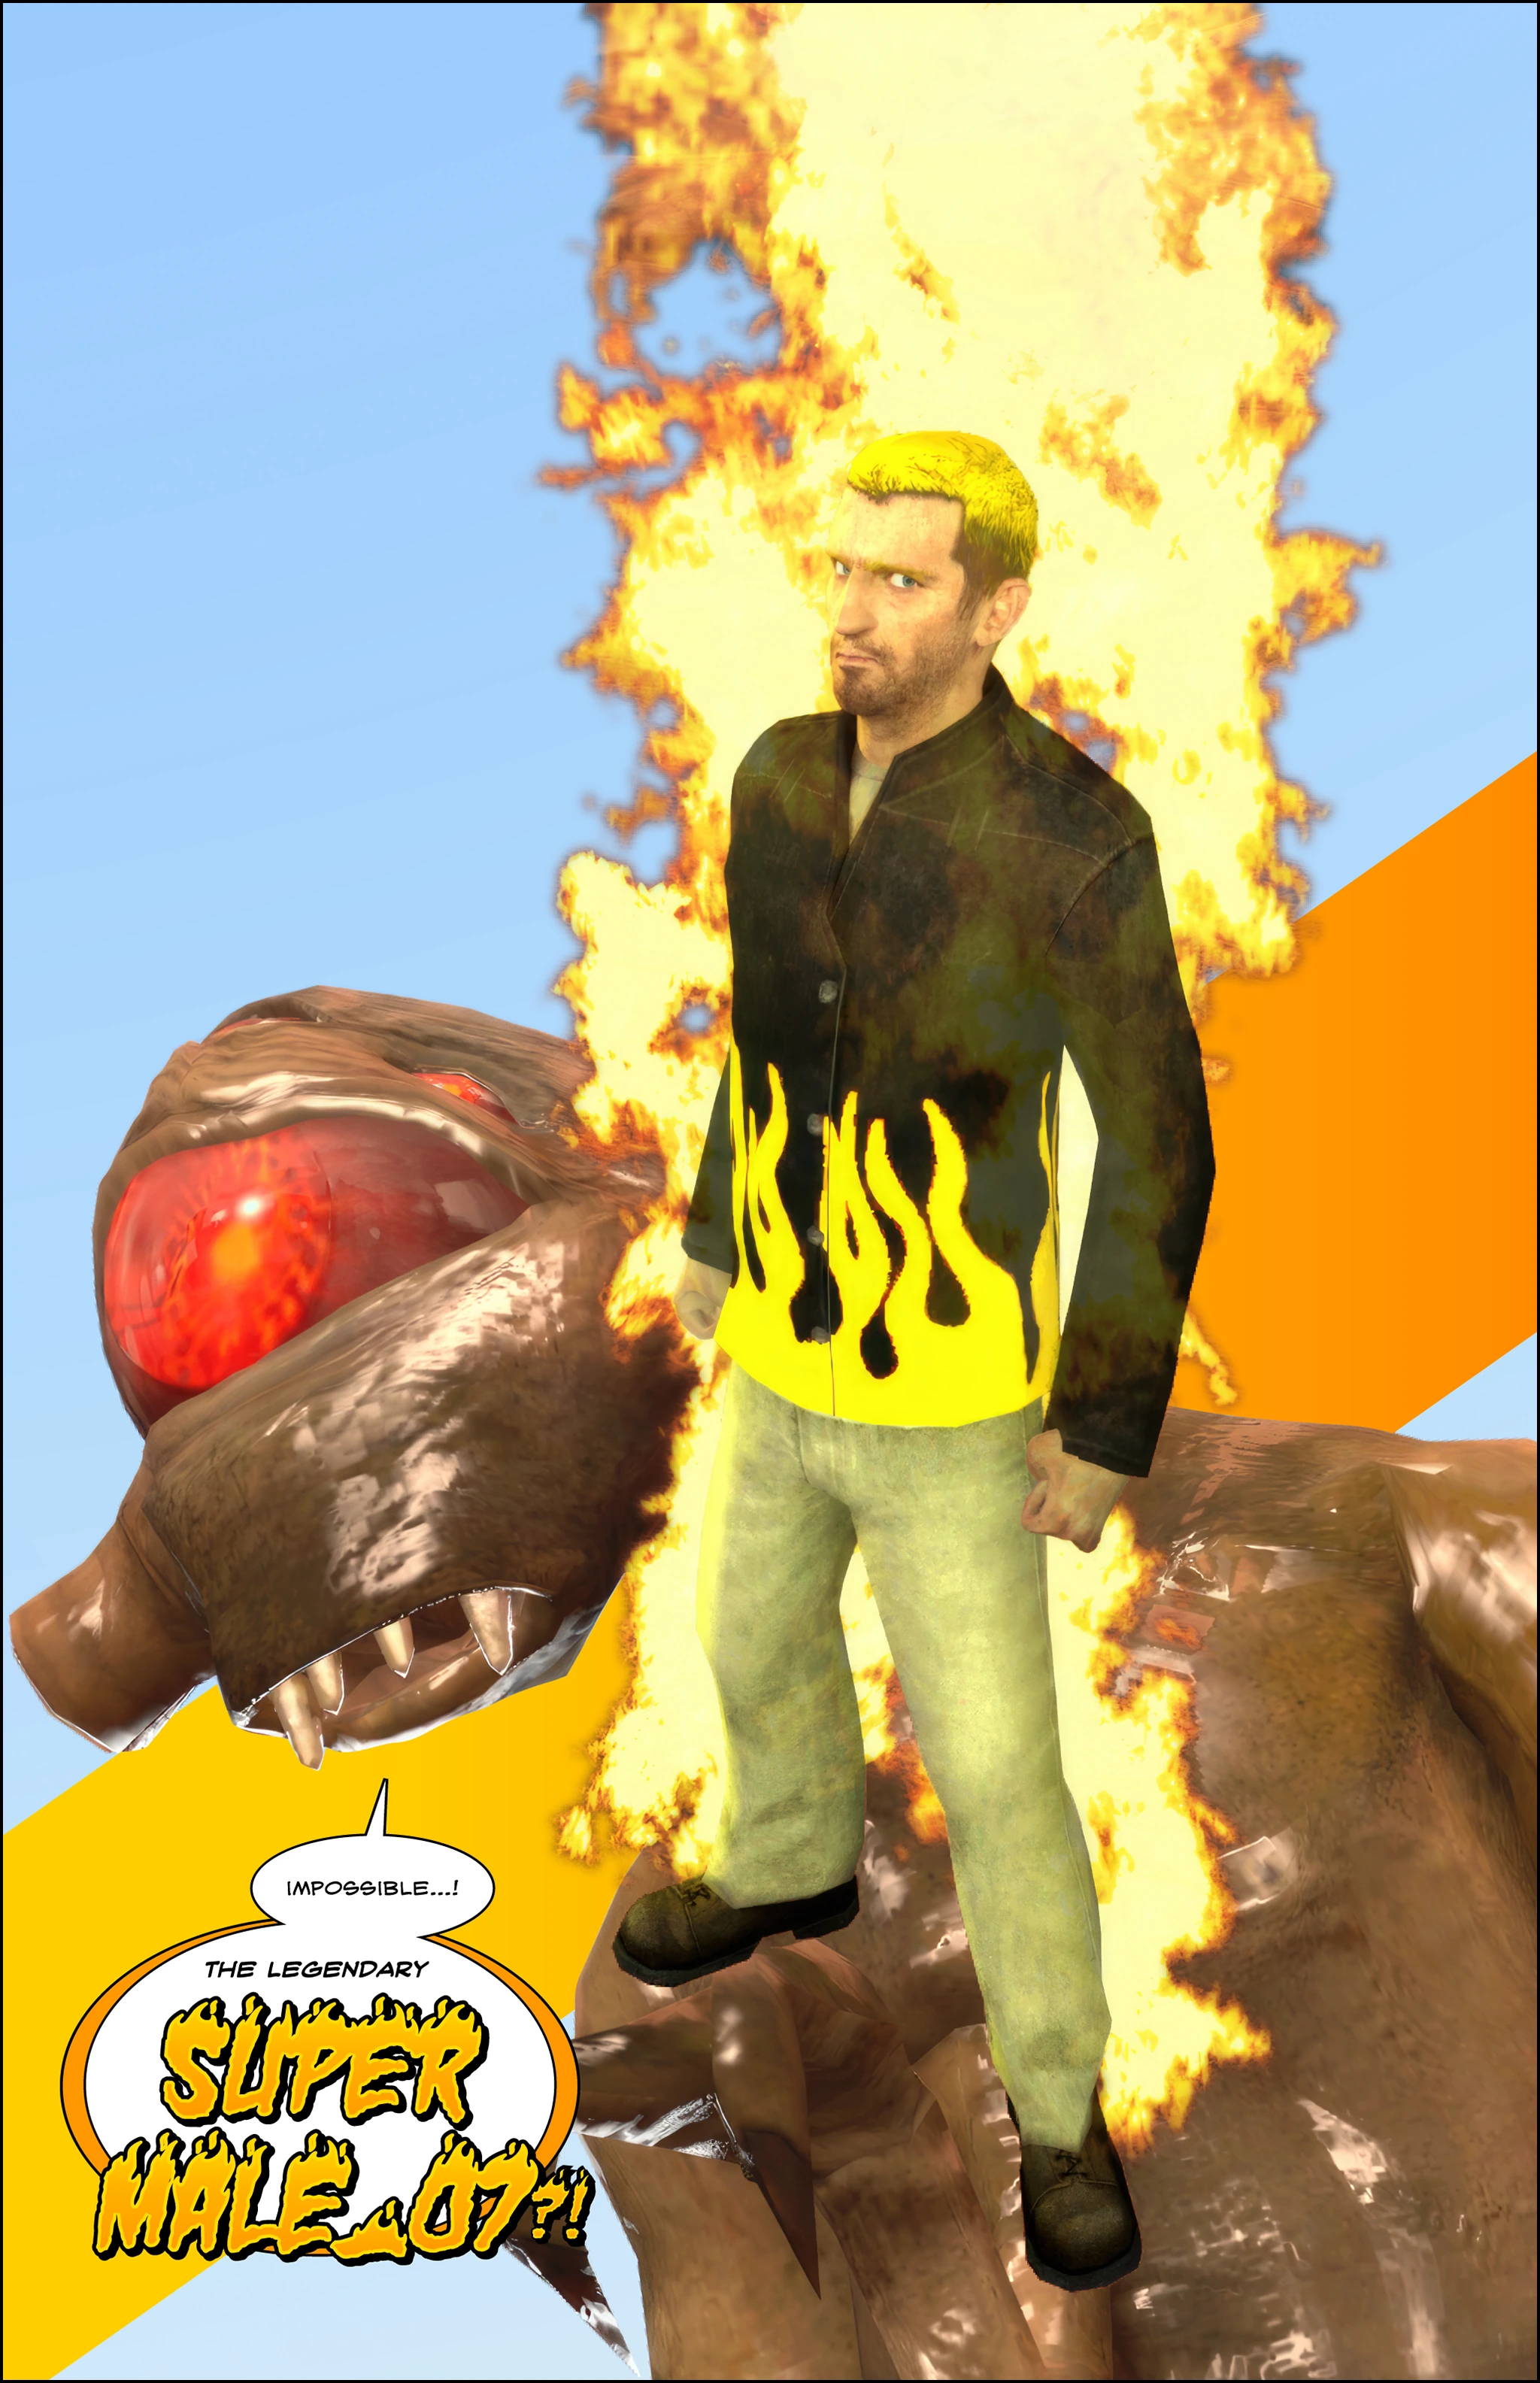 Jeff stares at the vortigaunt with golden air and covered in a flame-like golden aura. The vortigaunt stares at him in surprise, recognizing him as the legendary Super Male 07.